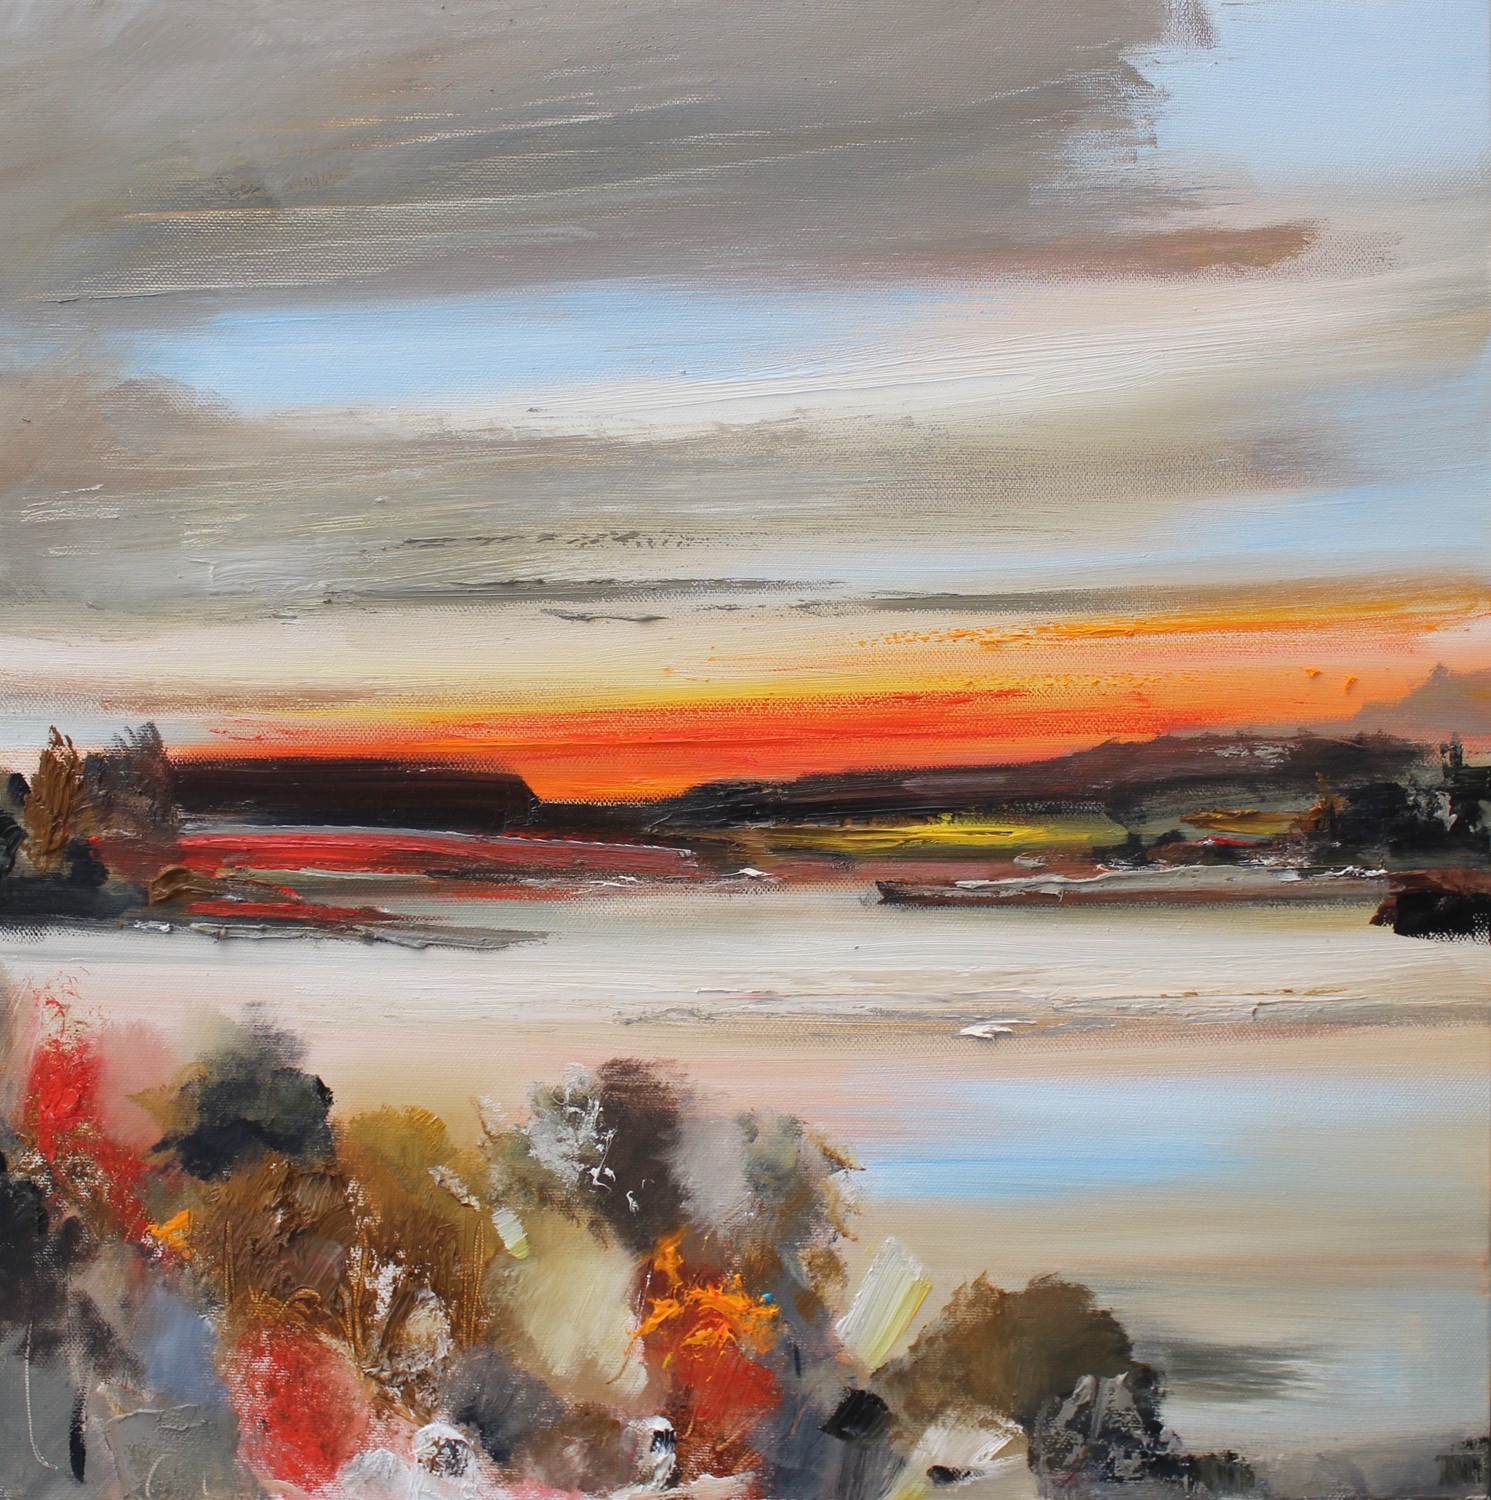 'The last moments of sunset' by artist Rosanne Barr